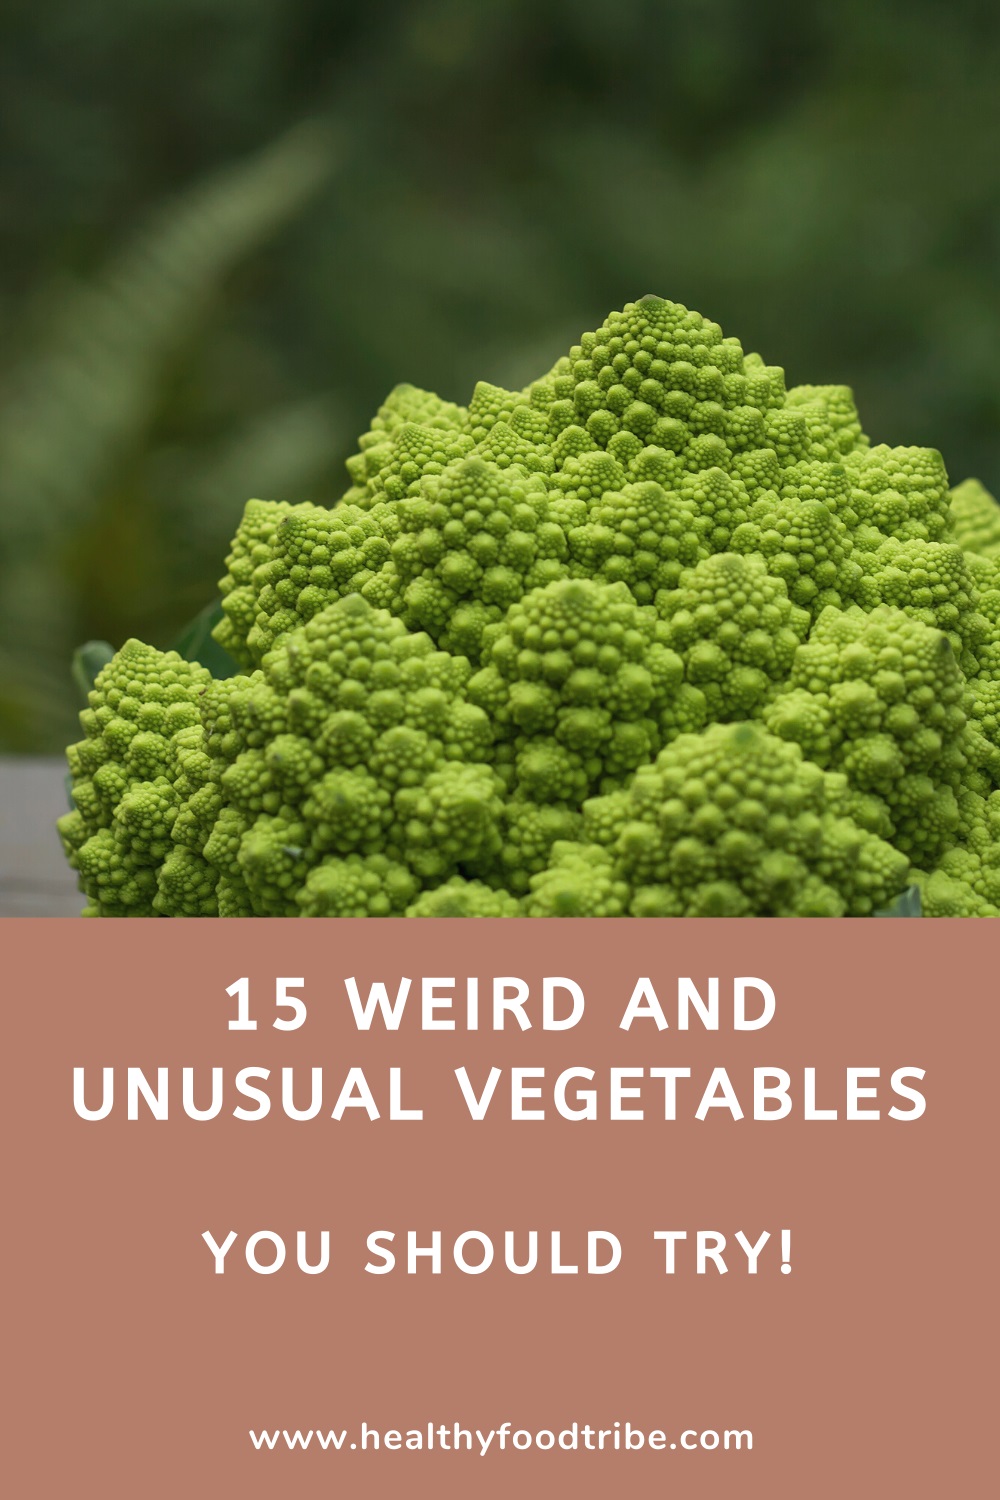 15 Weird and unusual vegetables you should try